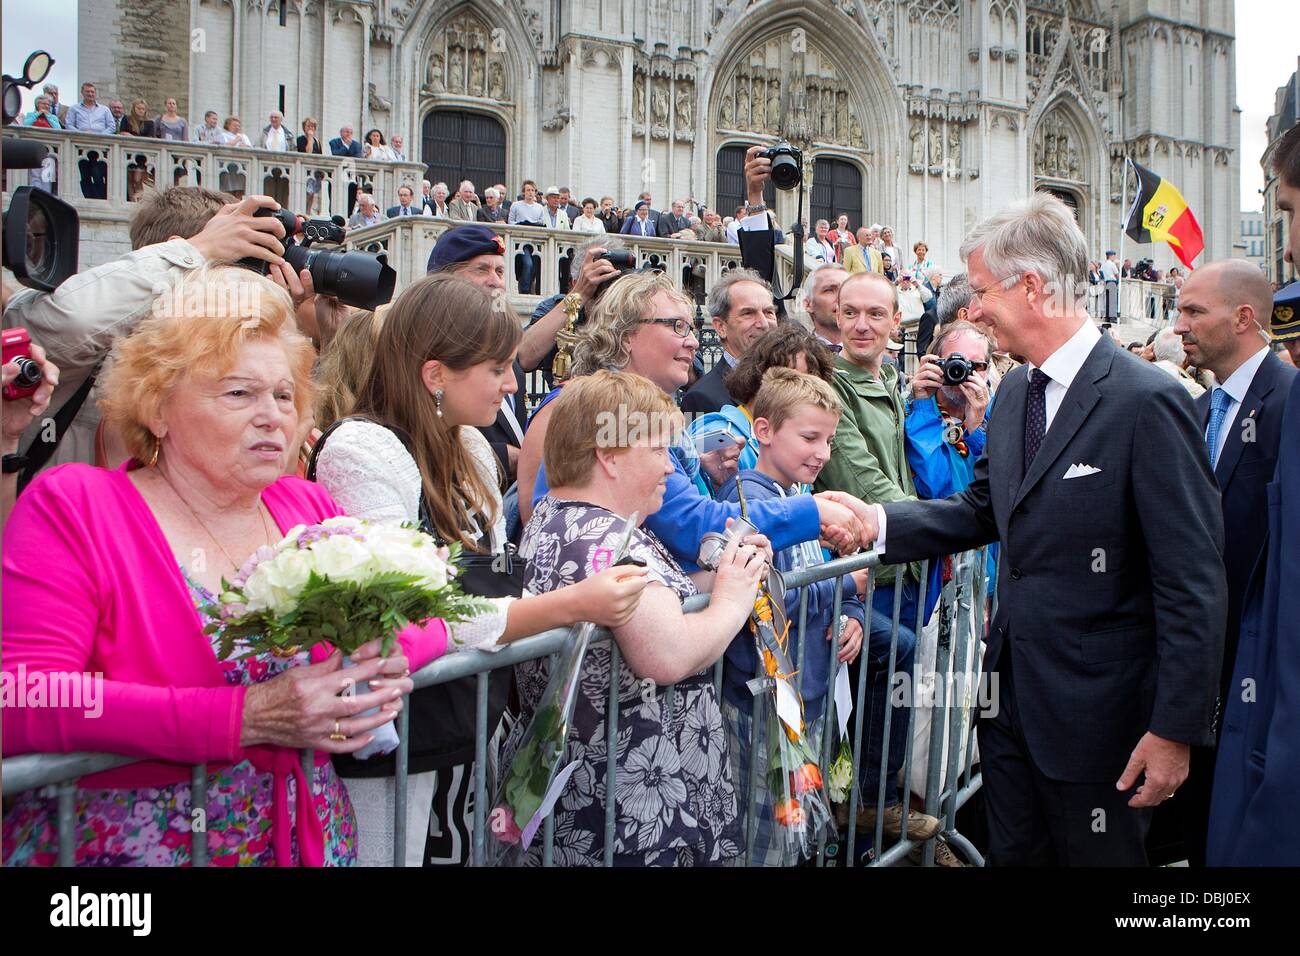 Brussels, Belgium. 31st July, 2013. King Philippe (Filip) of Belgium attends the mass to commemorate the death of King Baudouin 20 years ago at the Cathedral in Brussels, Belgium, 31 July 2013. Photo: Patrick van Katwijk/dpa/Alamy Live News Stock Photo